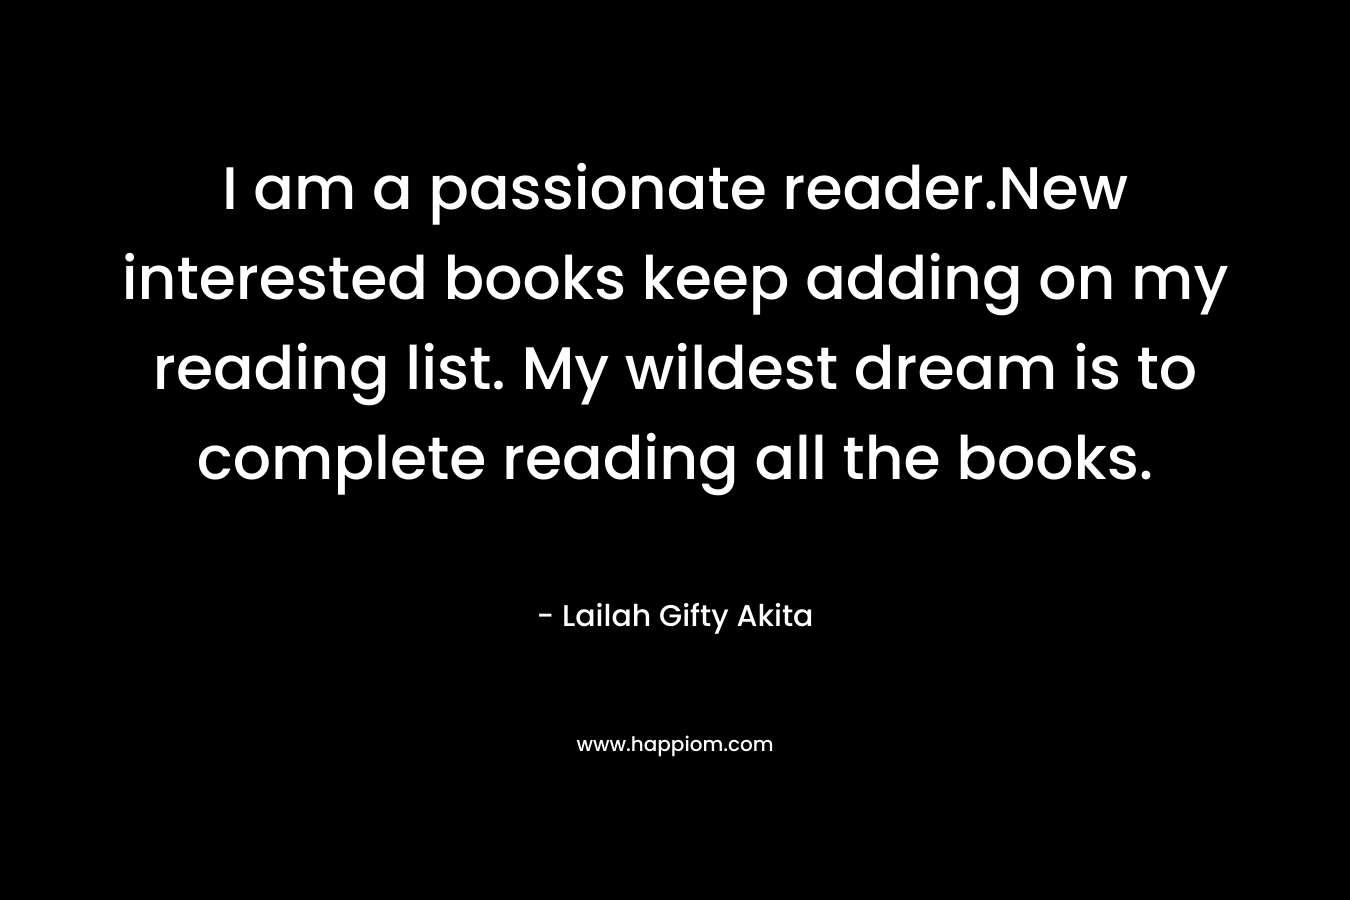 I am a passionate reader.New interested books keep adding on my reading list. My wildest dream is to complete reading all the books. – Lailah Gifty Akita